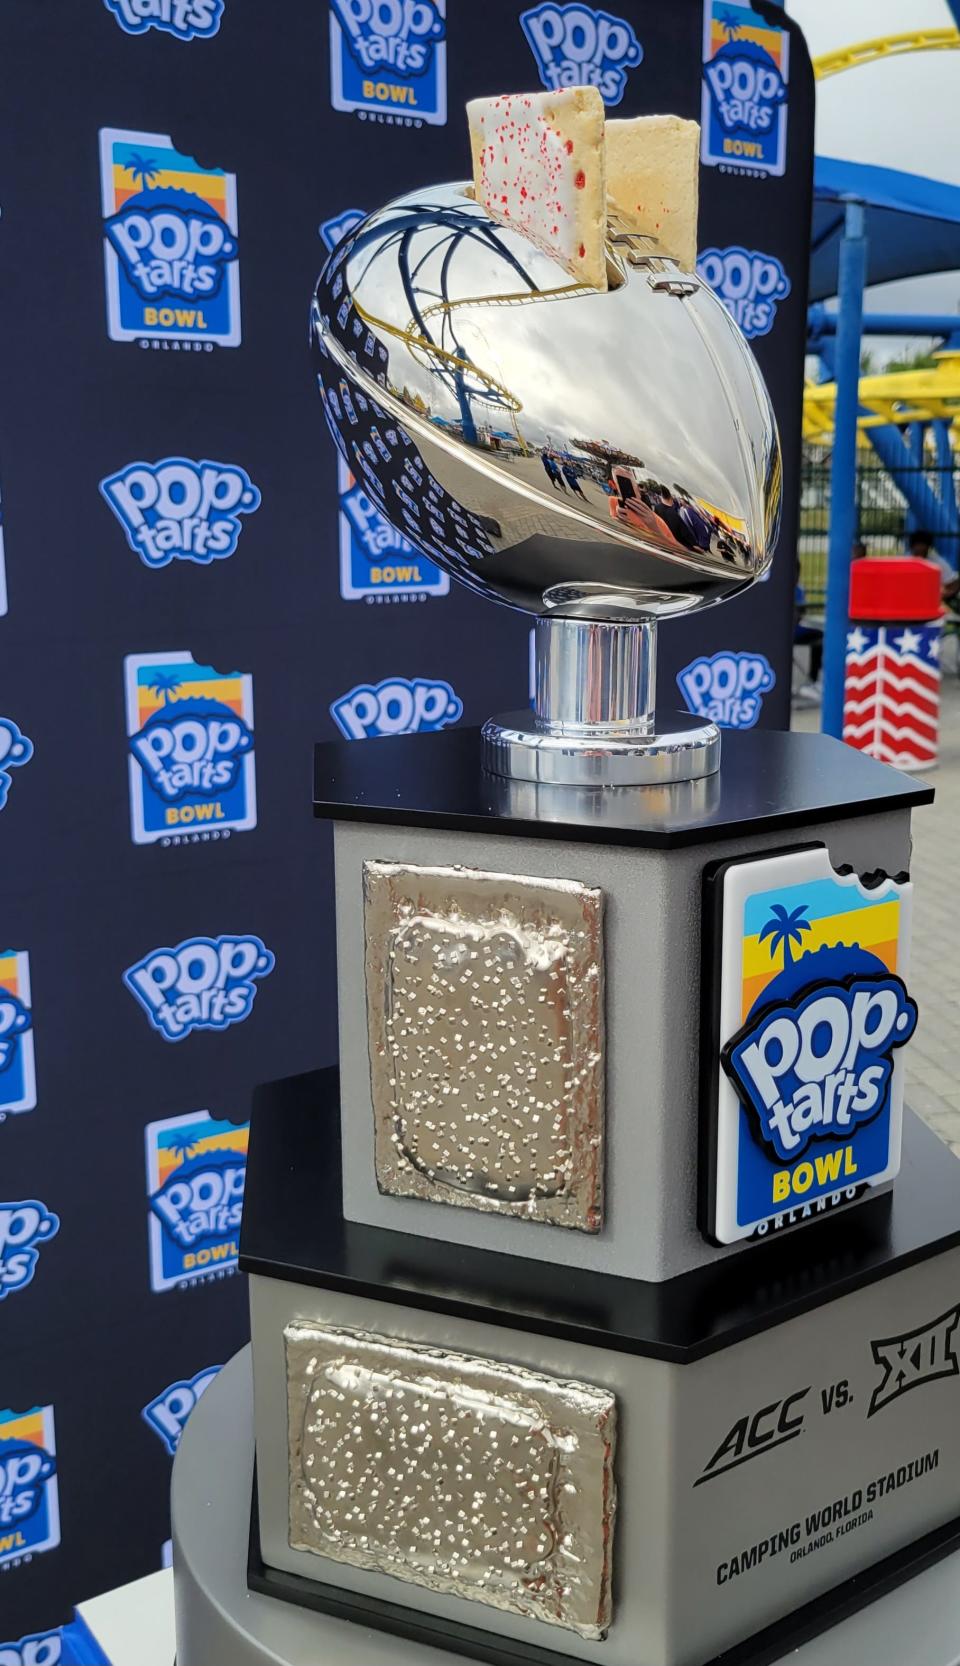 The Pop-Tarts Bowl trophy was on display Tuesday at the Fun Spot America theme park in Orlando, Fla.